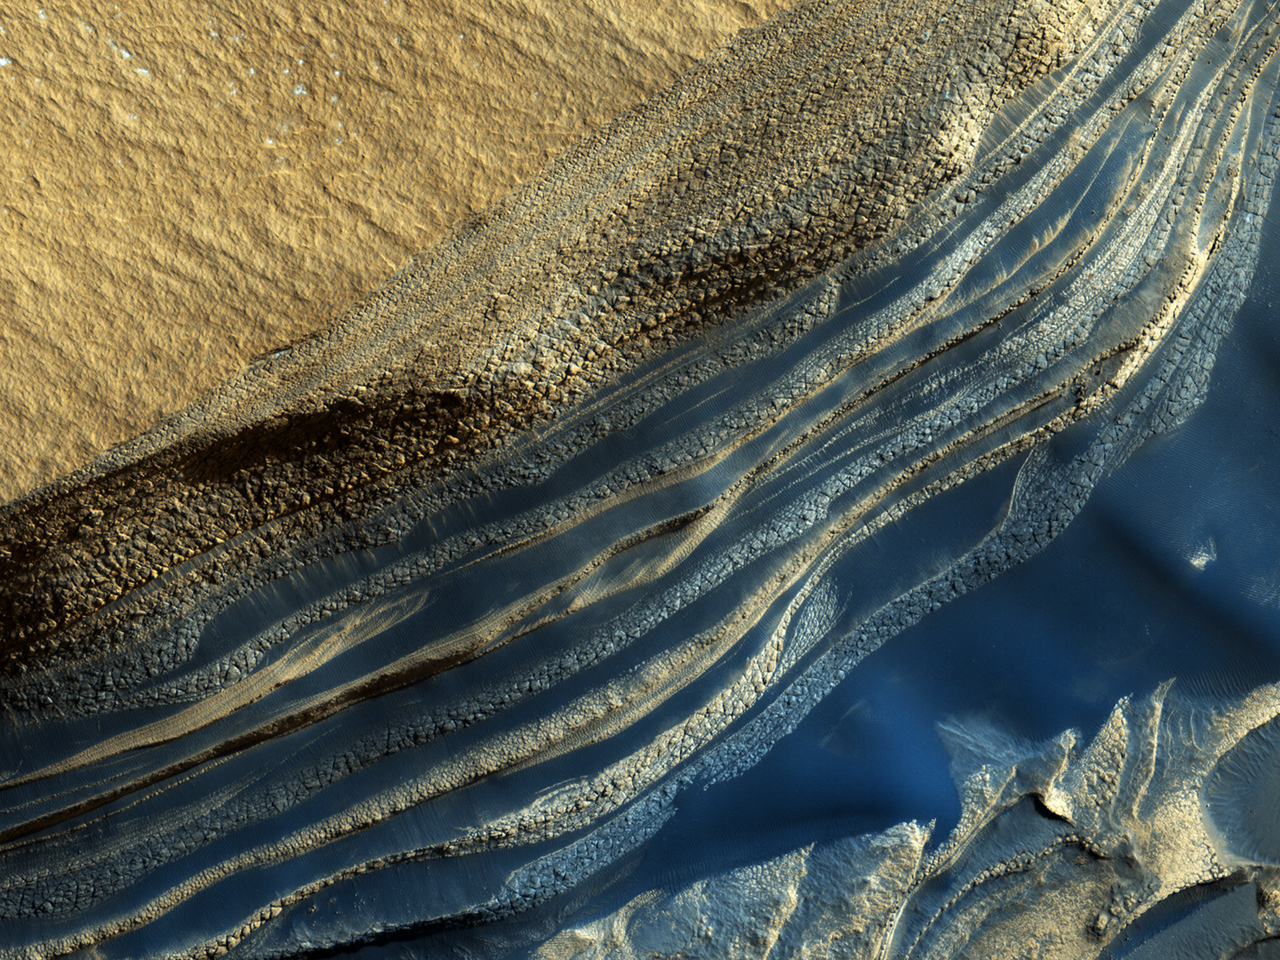 The Beauty of the North Polar Layered Deposits